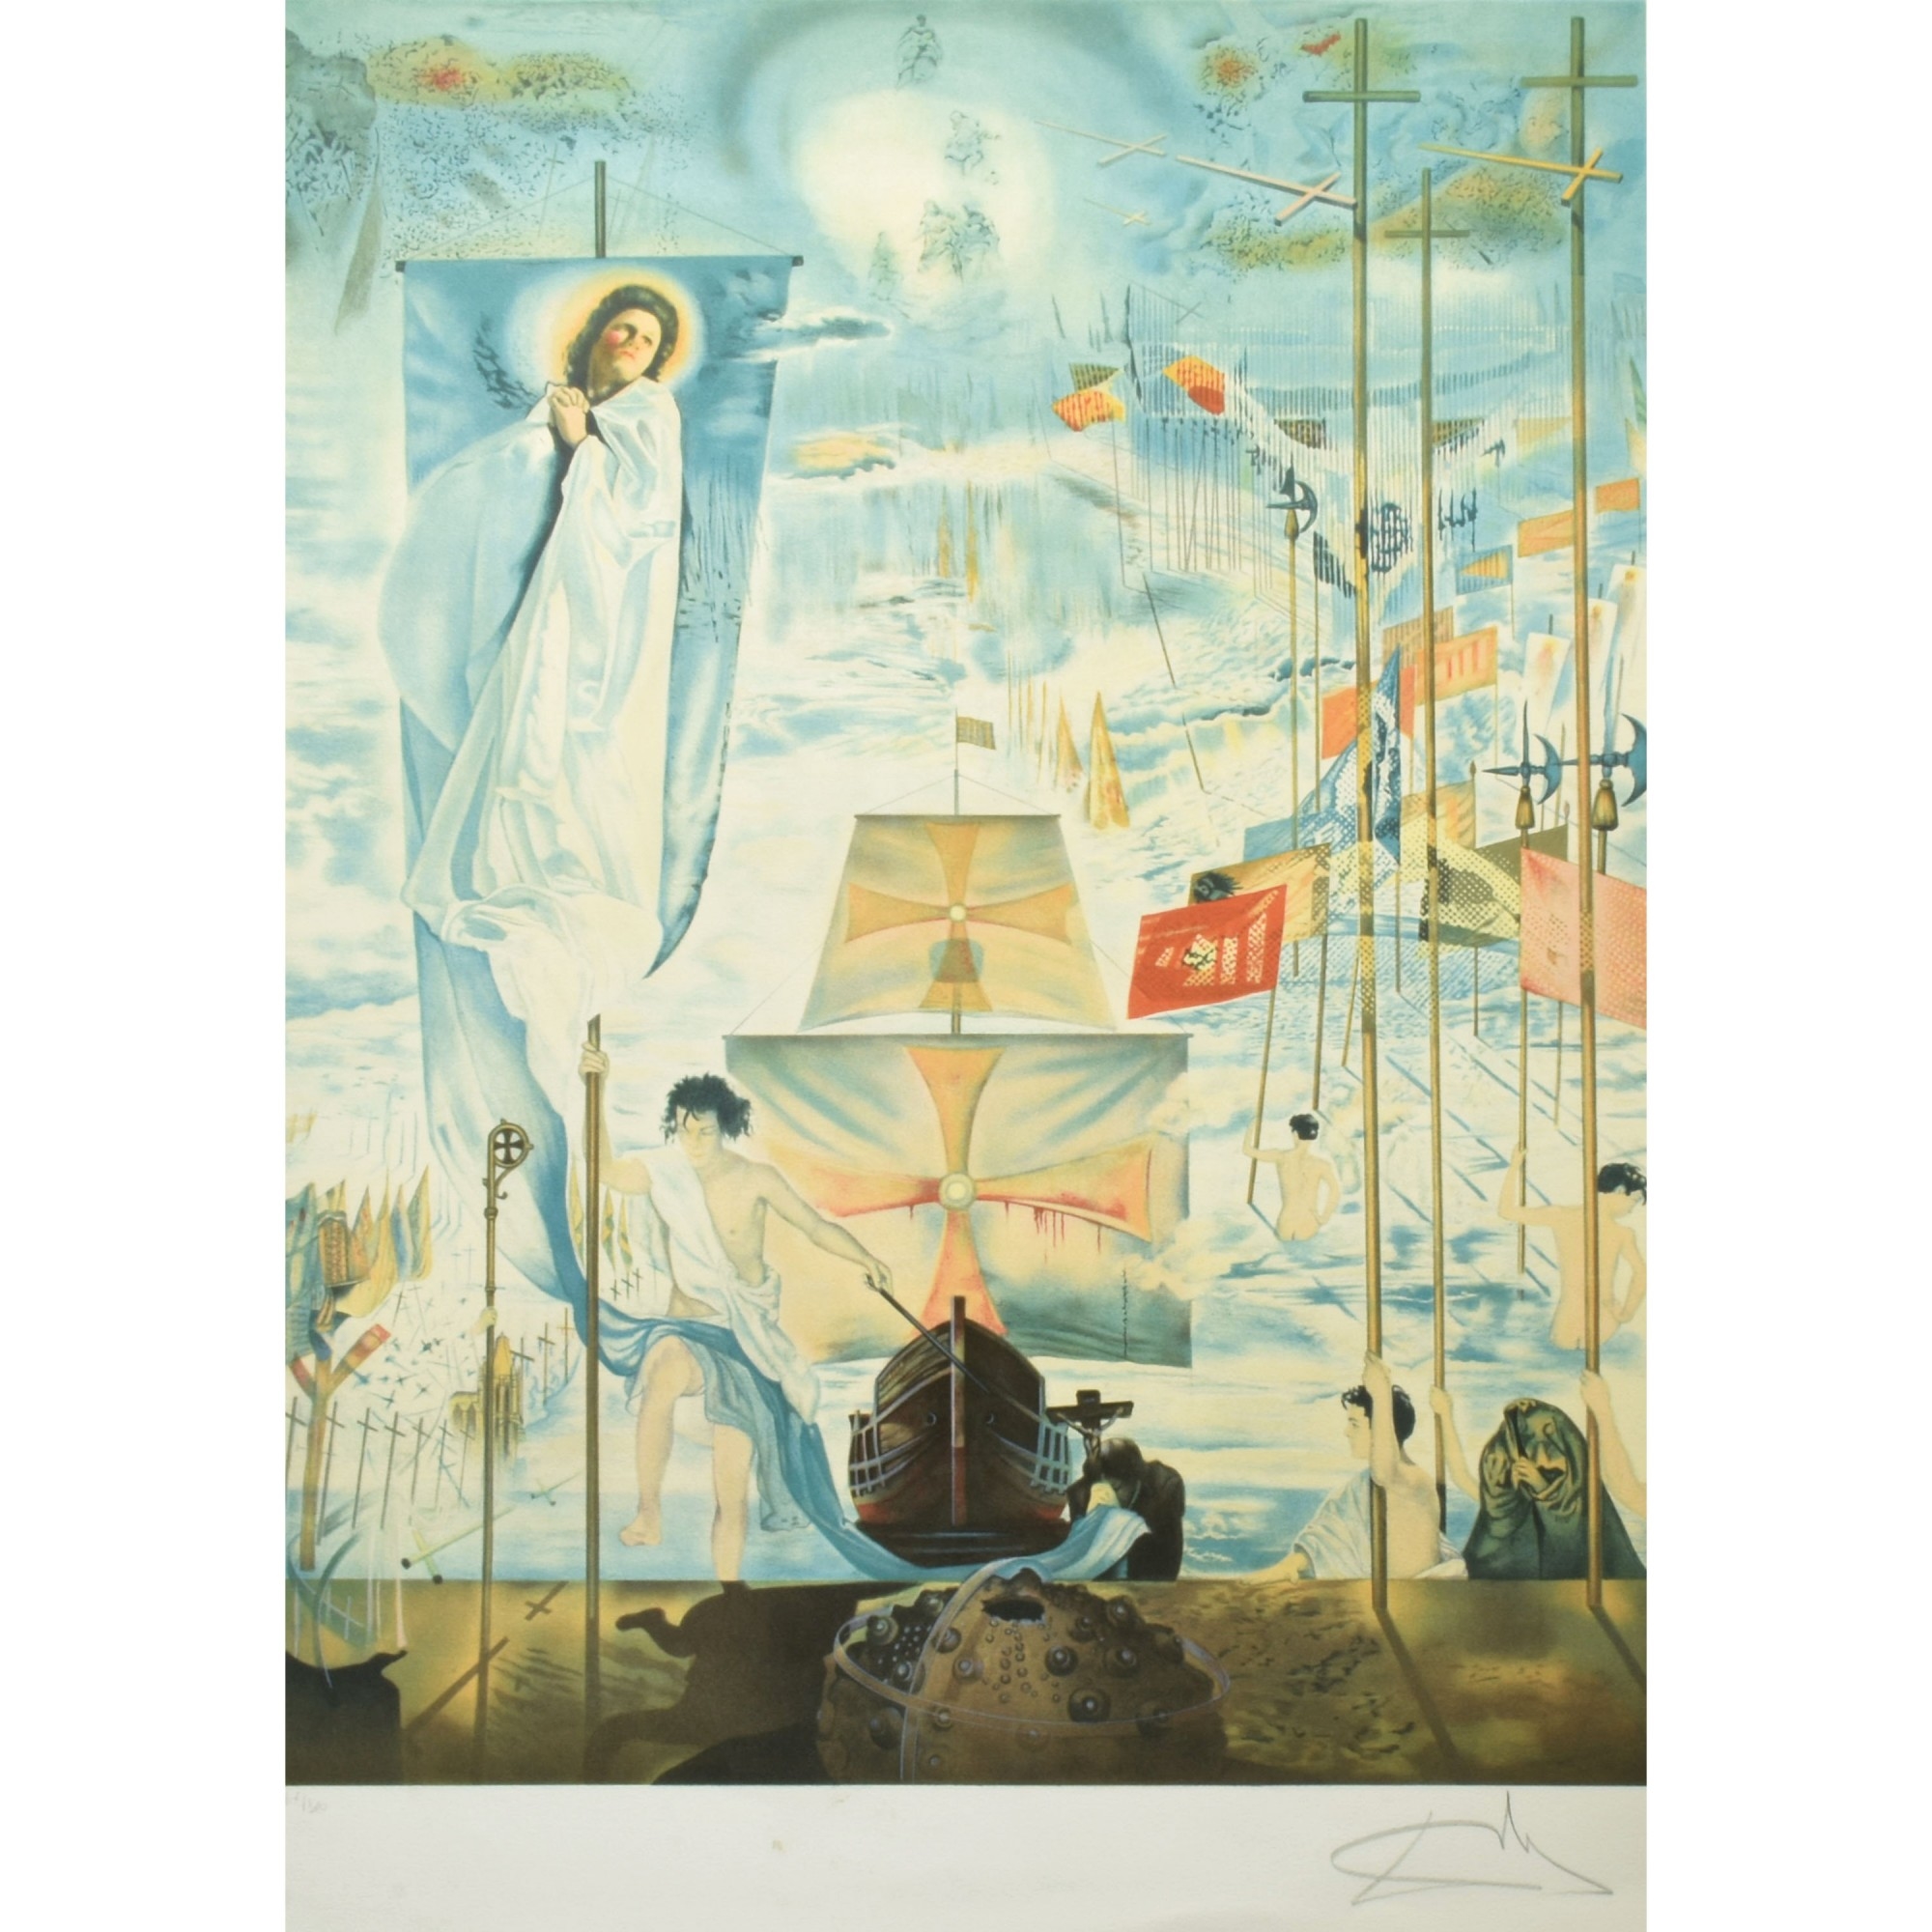 The Discovery of America by Christopher Columbus by Salvador Dalí